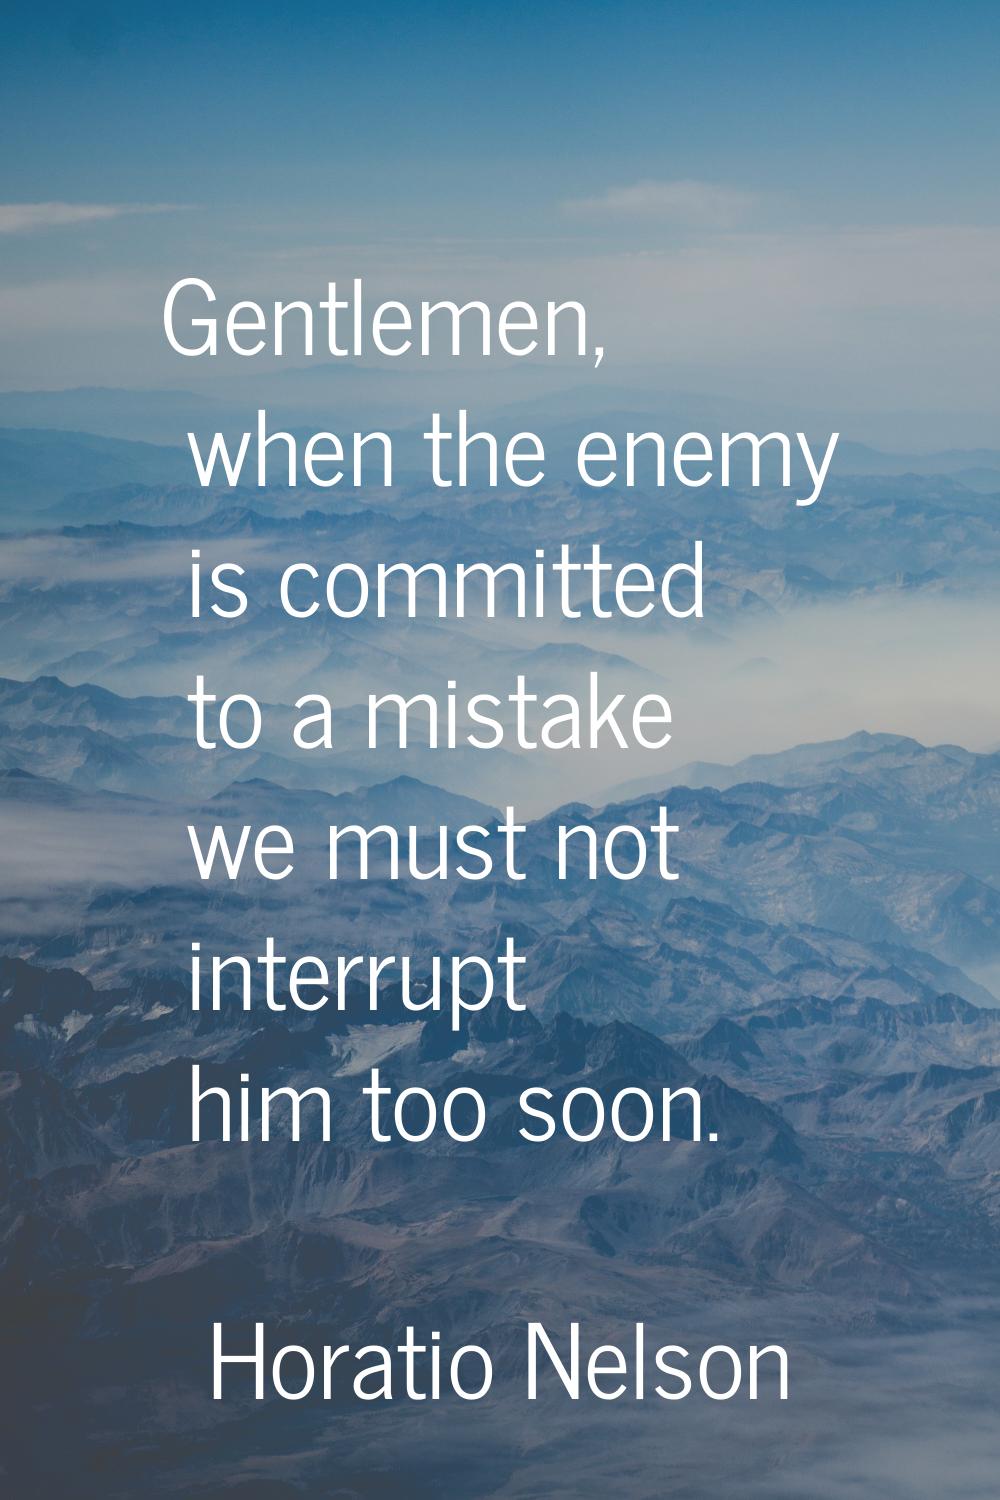 Gentlemen, when the enemy is committed to a mistake we must not interrupt him too soon.